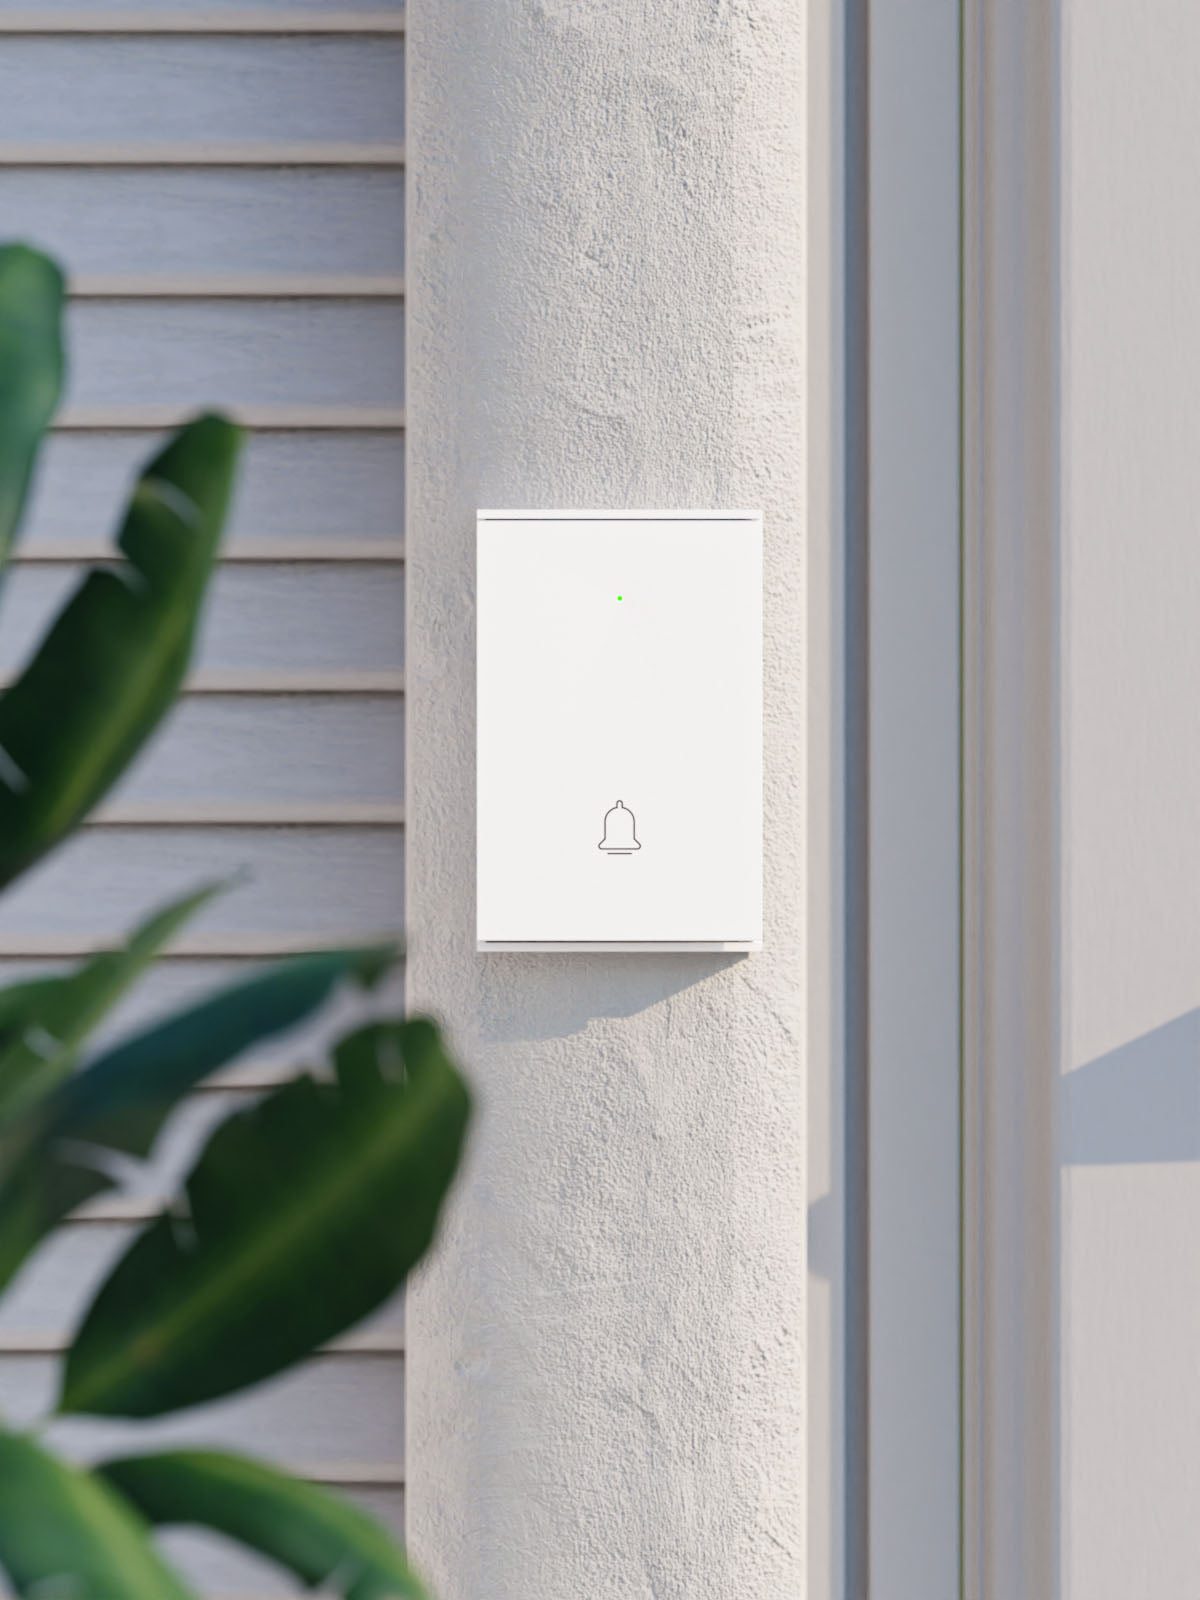 B100 Wireless Door Bell positioned near front home entry against stucco wall